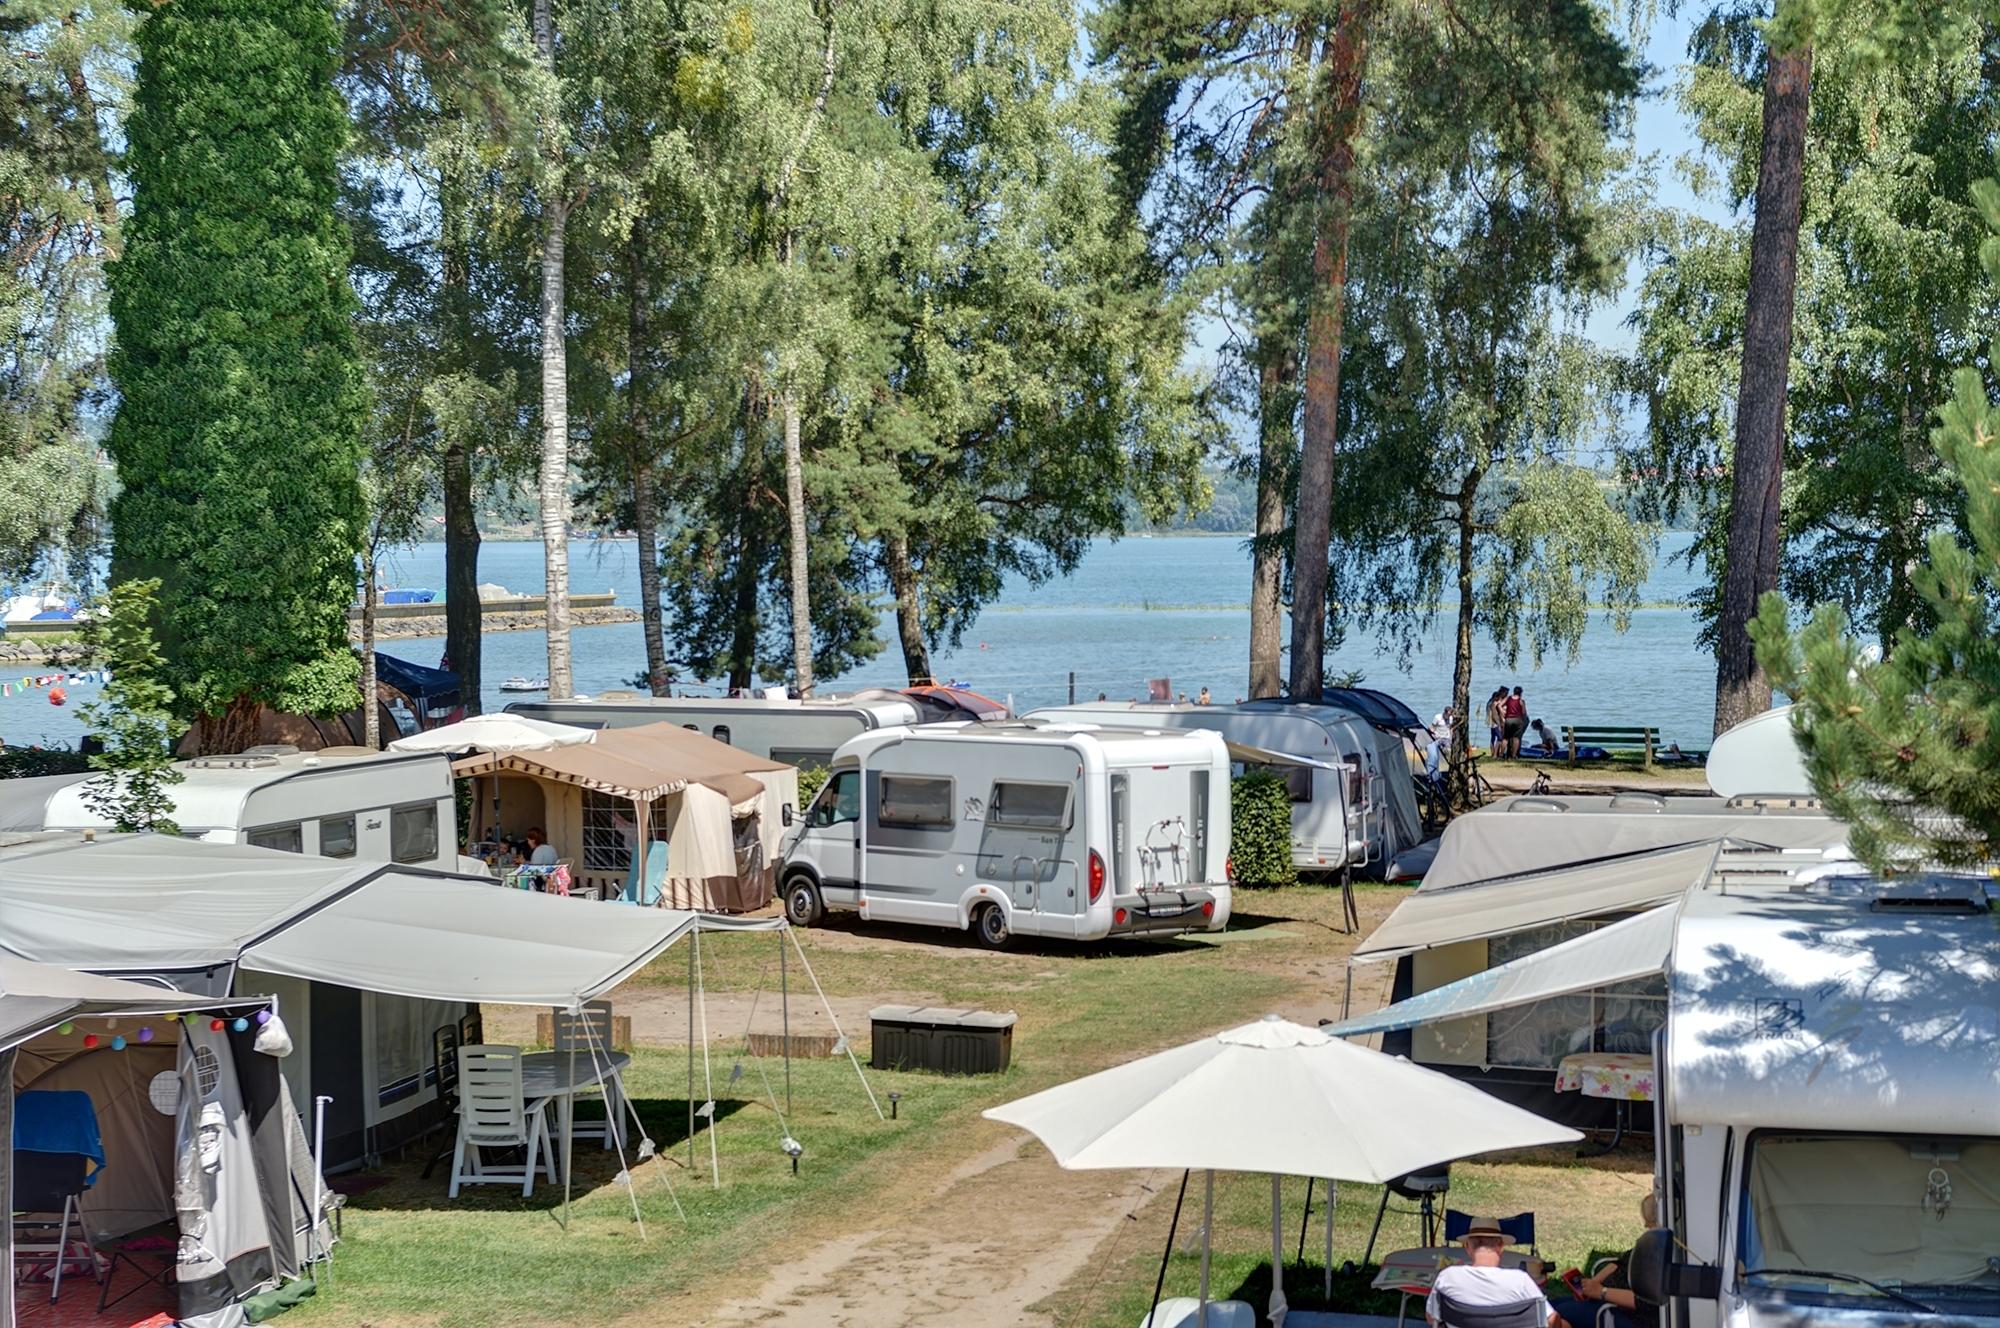 VD_Avenches_Camping_Plage_(4)